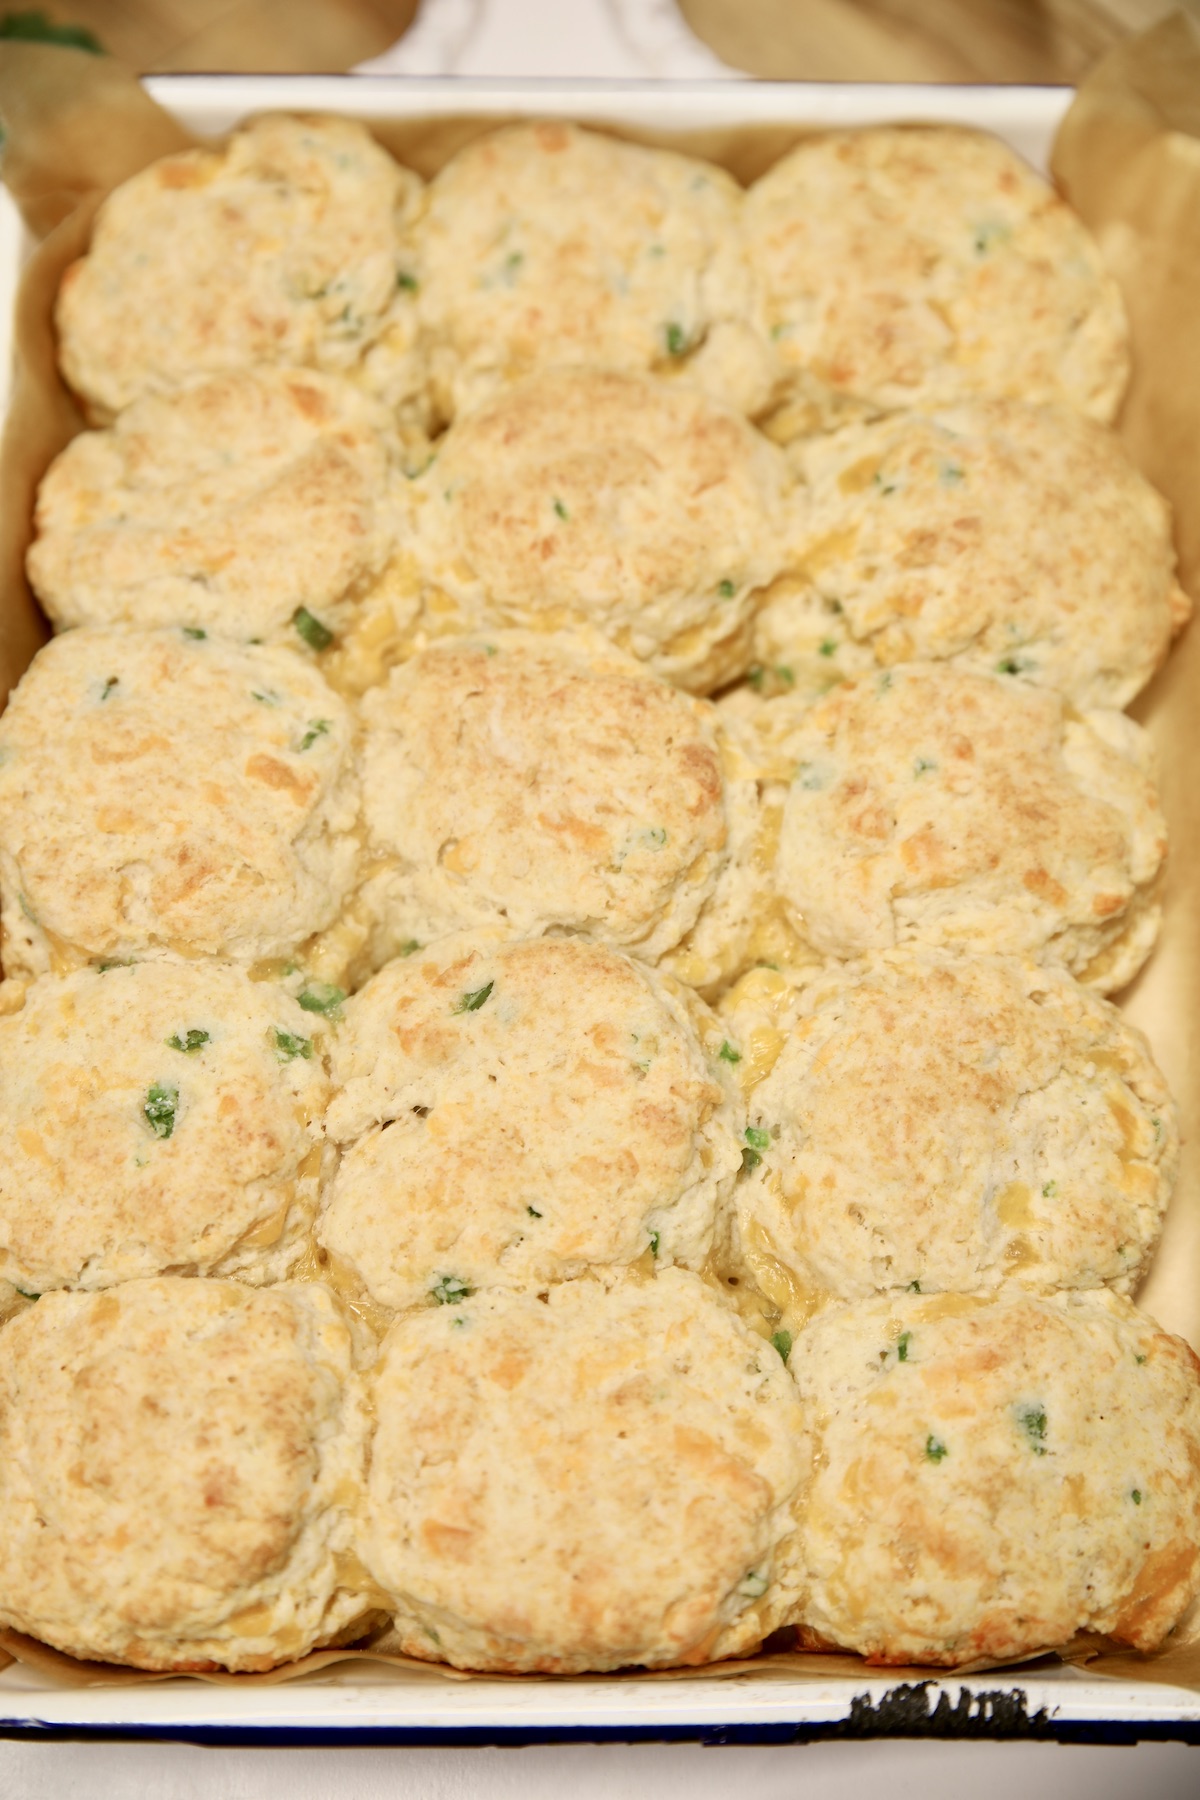 Baked jalapeno cheddar biscuits in a pan.